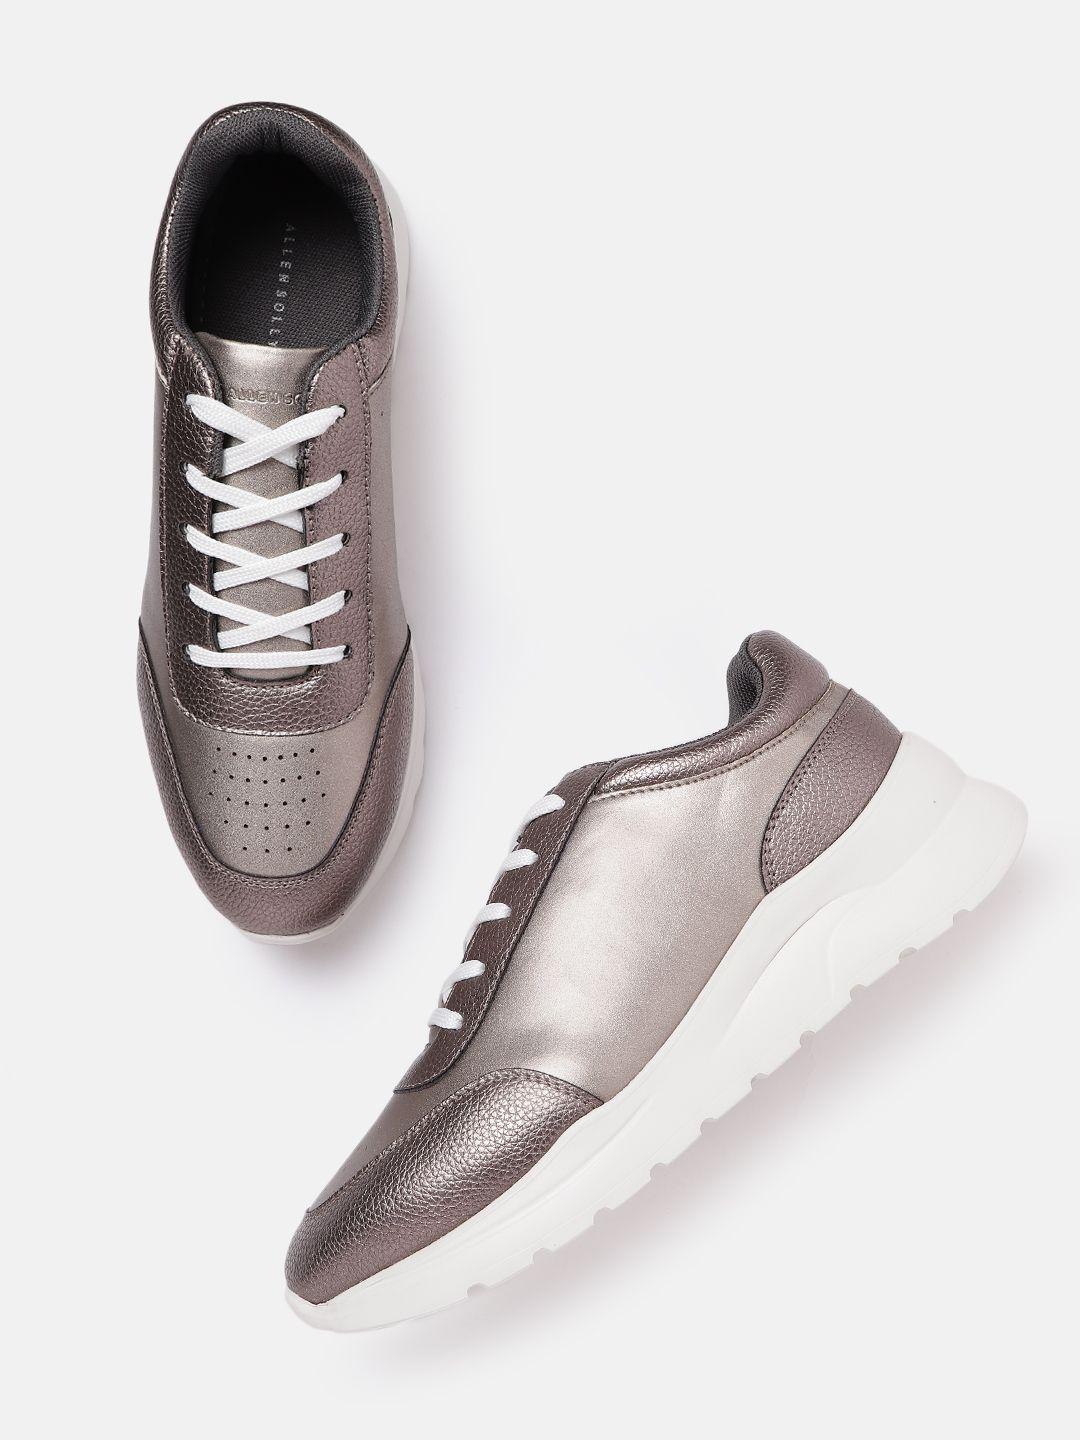 allen solly women gunmetal-toned perforated chunky sneakers